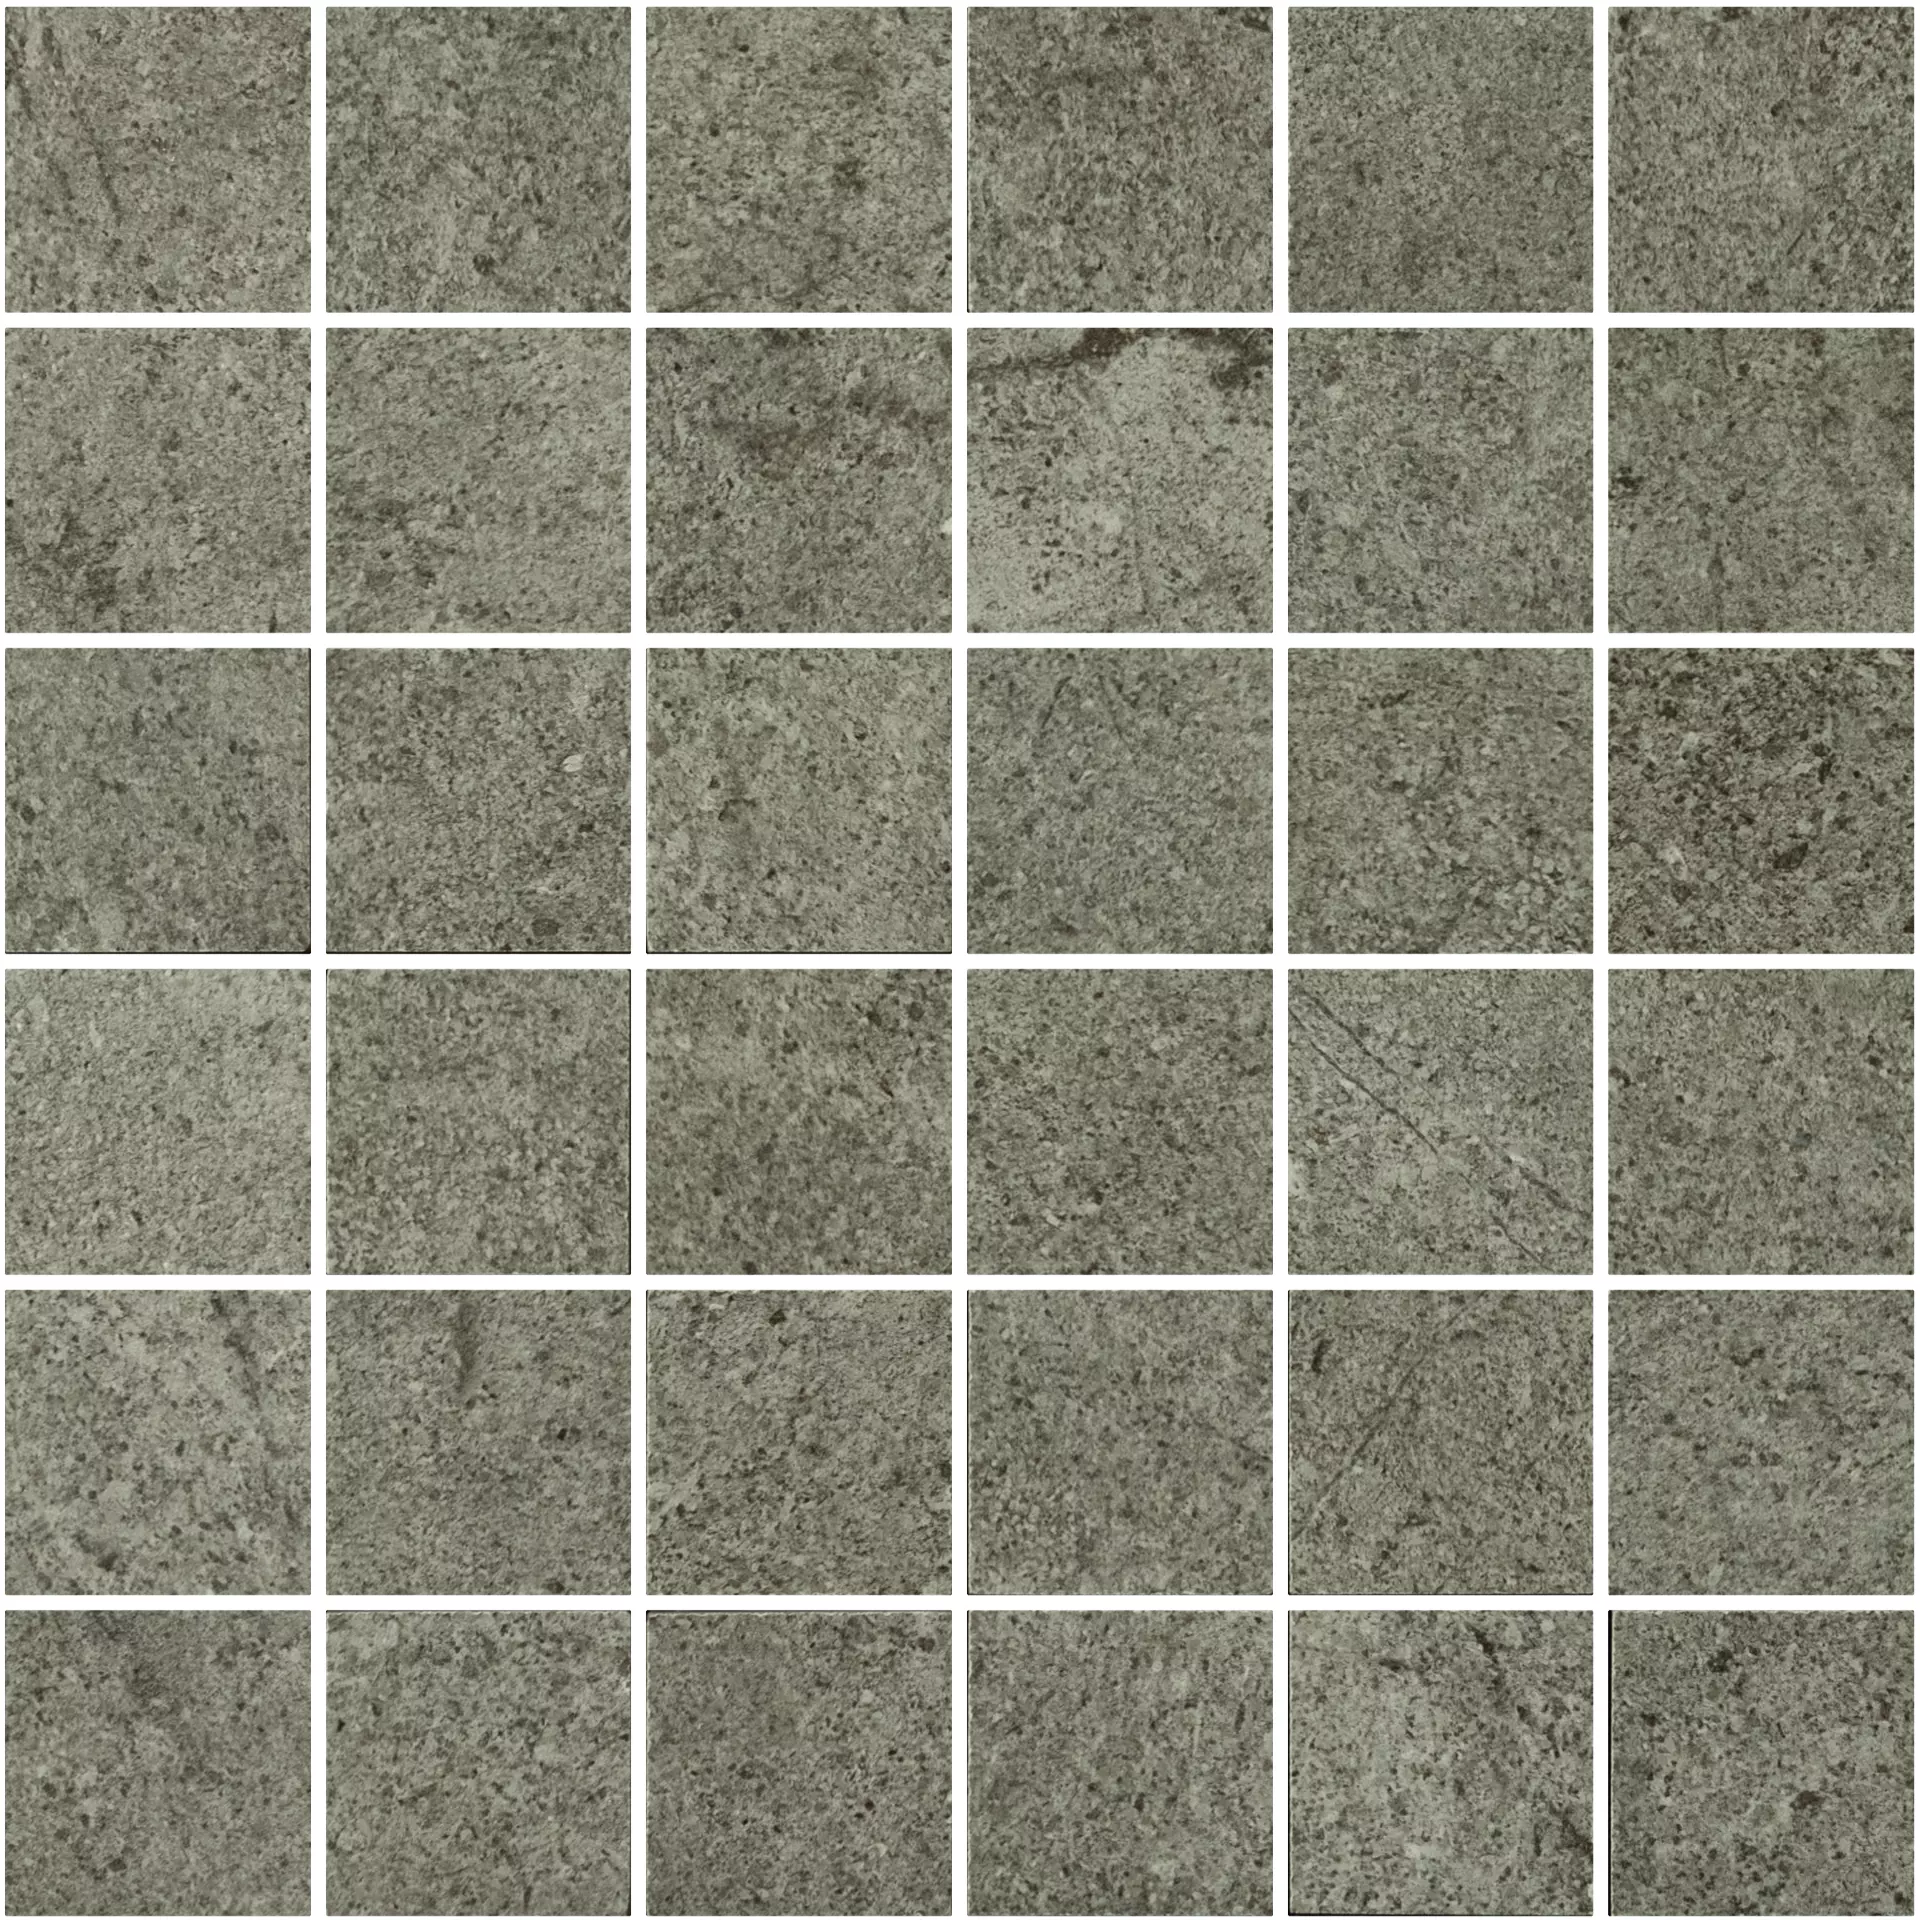 Cercom Archistone Taupe Naturale Mosaic 5X5 1081855 30x30cm rectified